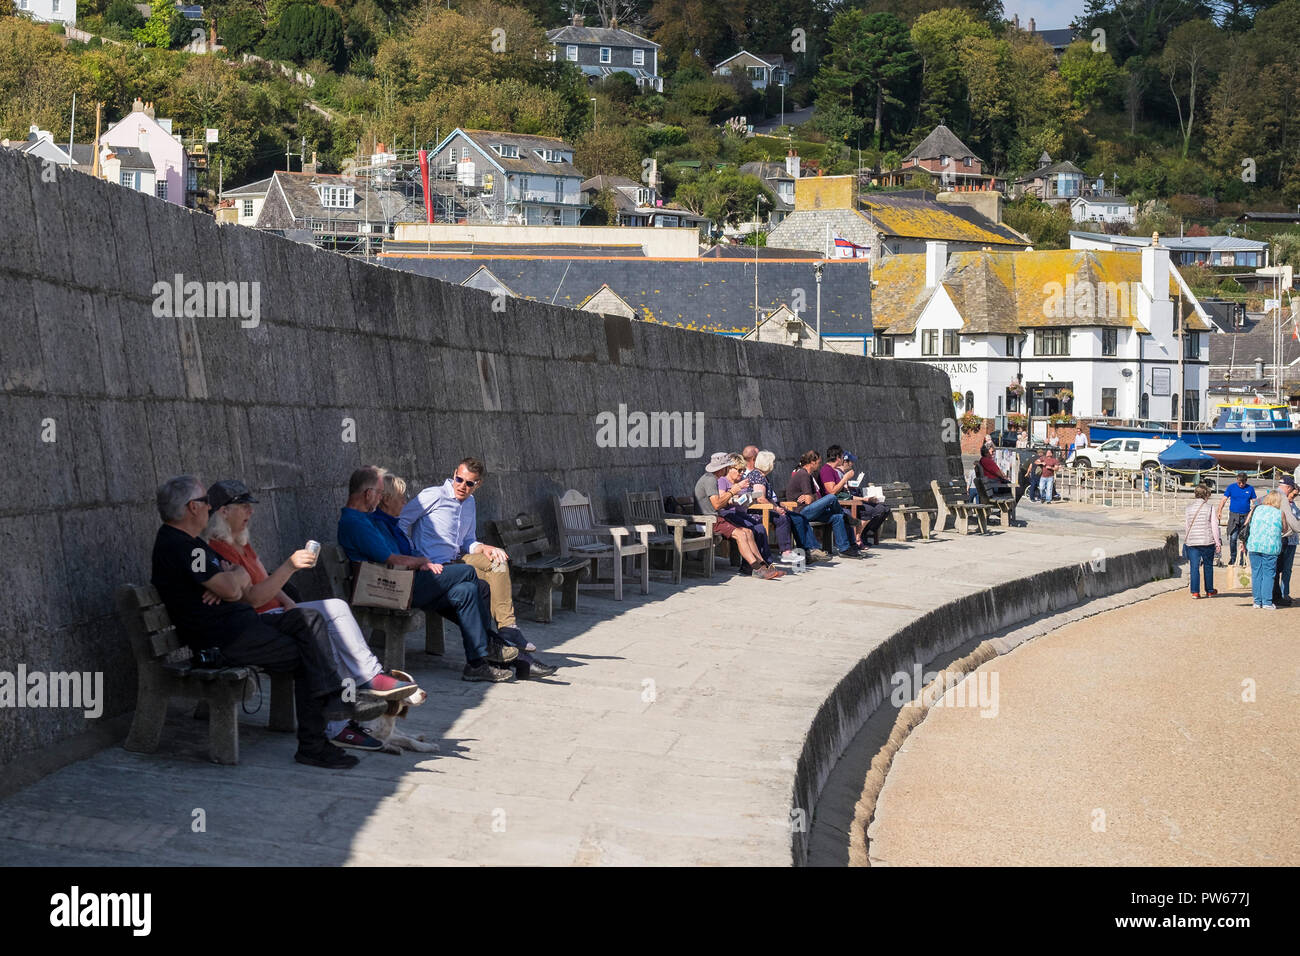 People sitting and relaxing on The Cobb in the coastal town of Lyme Regis in Dorset. Stock Photo